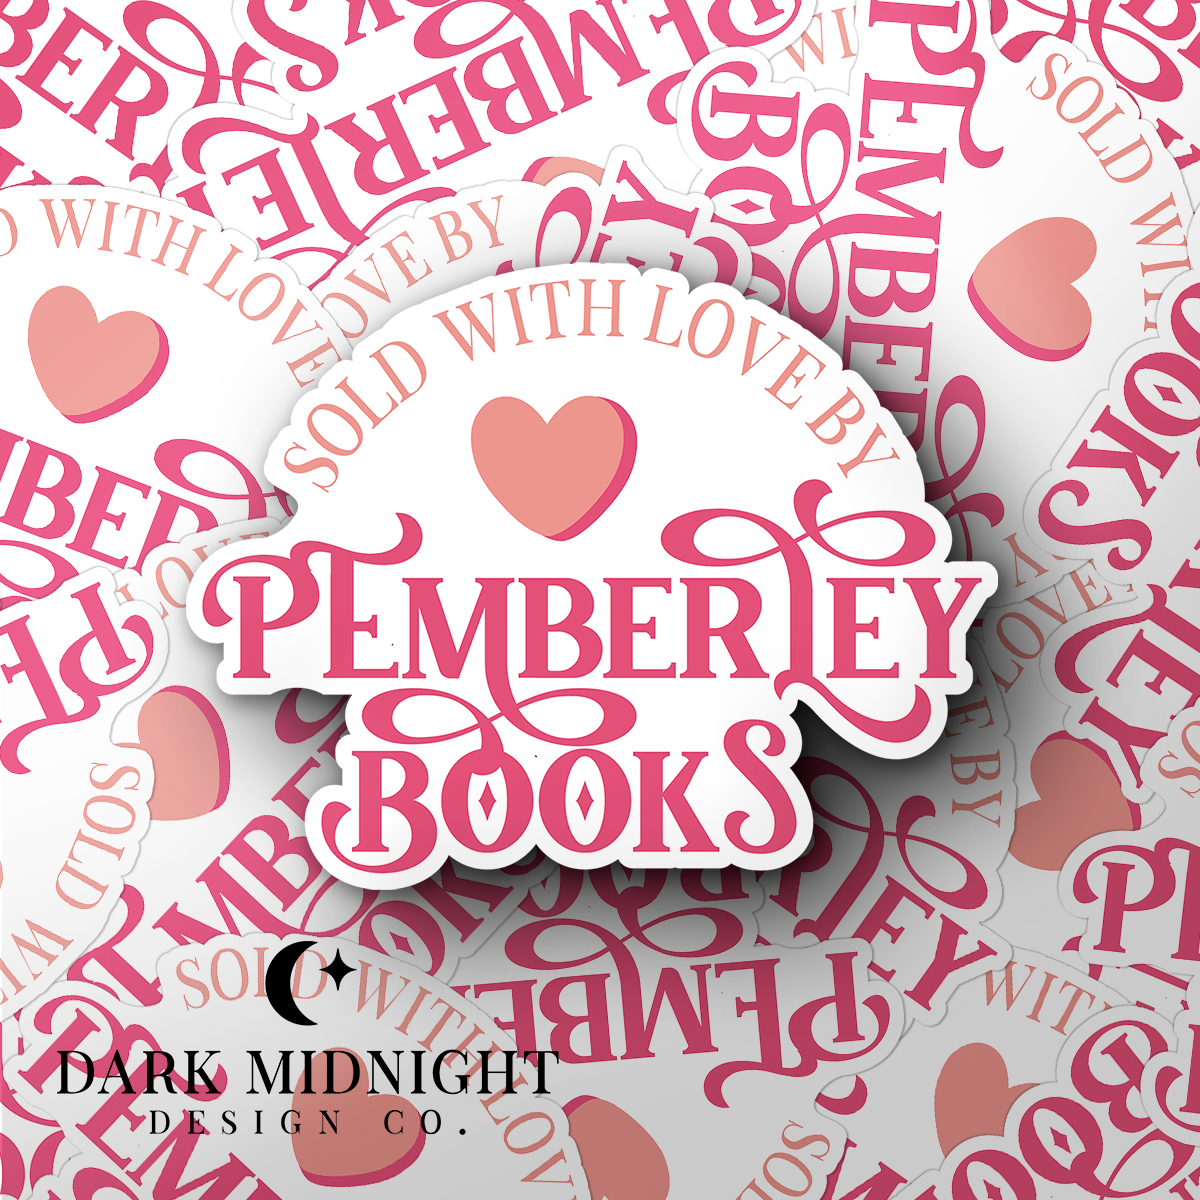 Sold With Love By Pemberley Books Sticker - Officially Licensed Queen's Cove Series